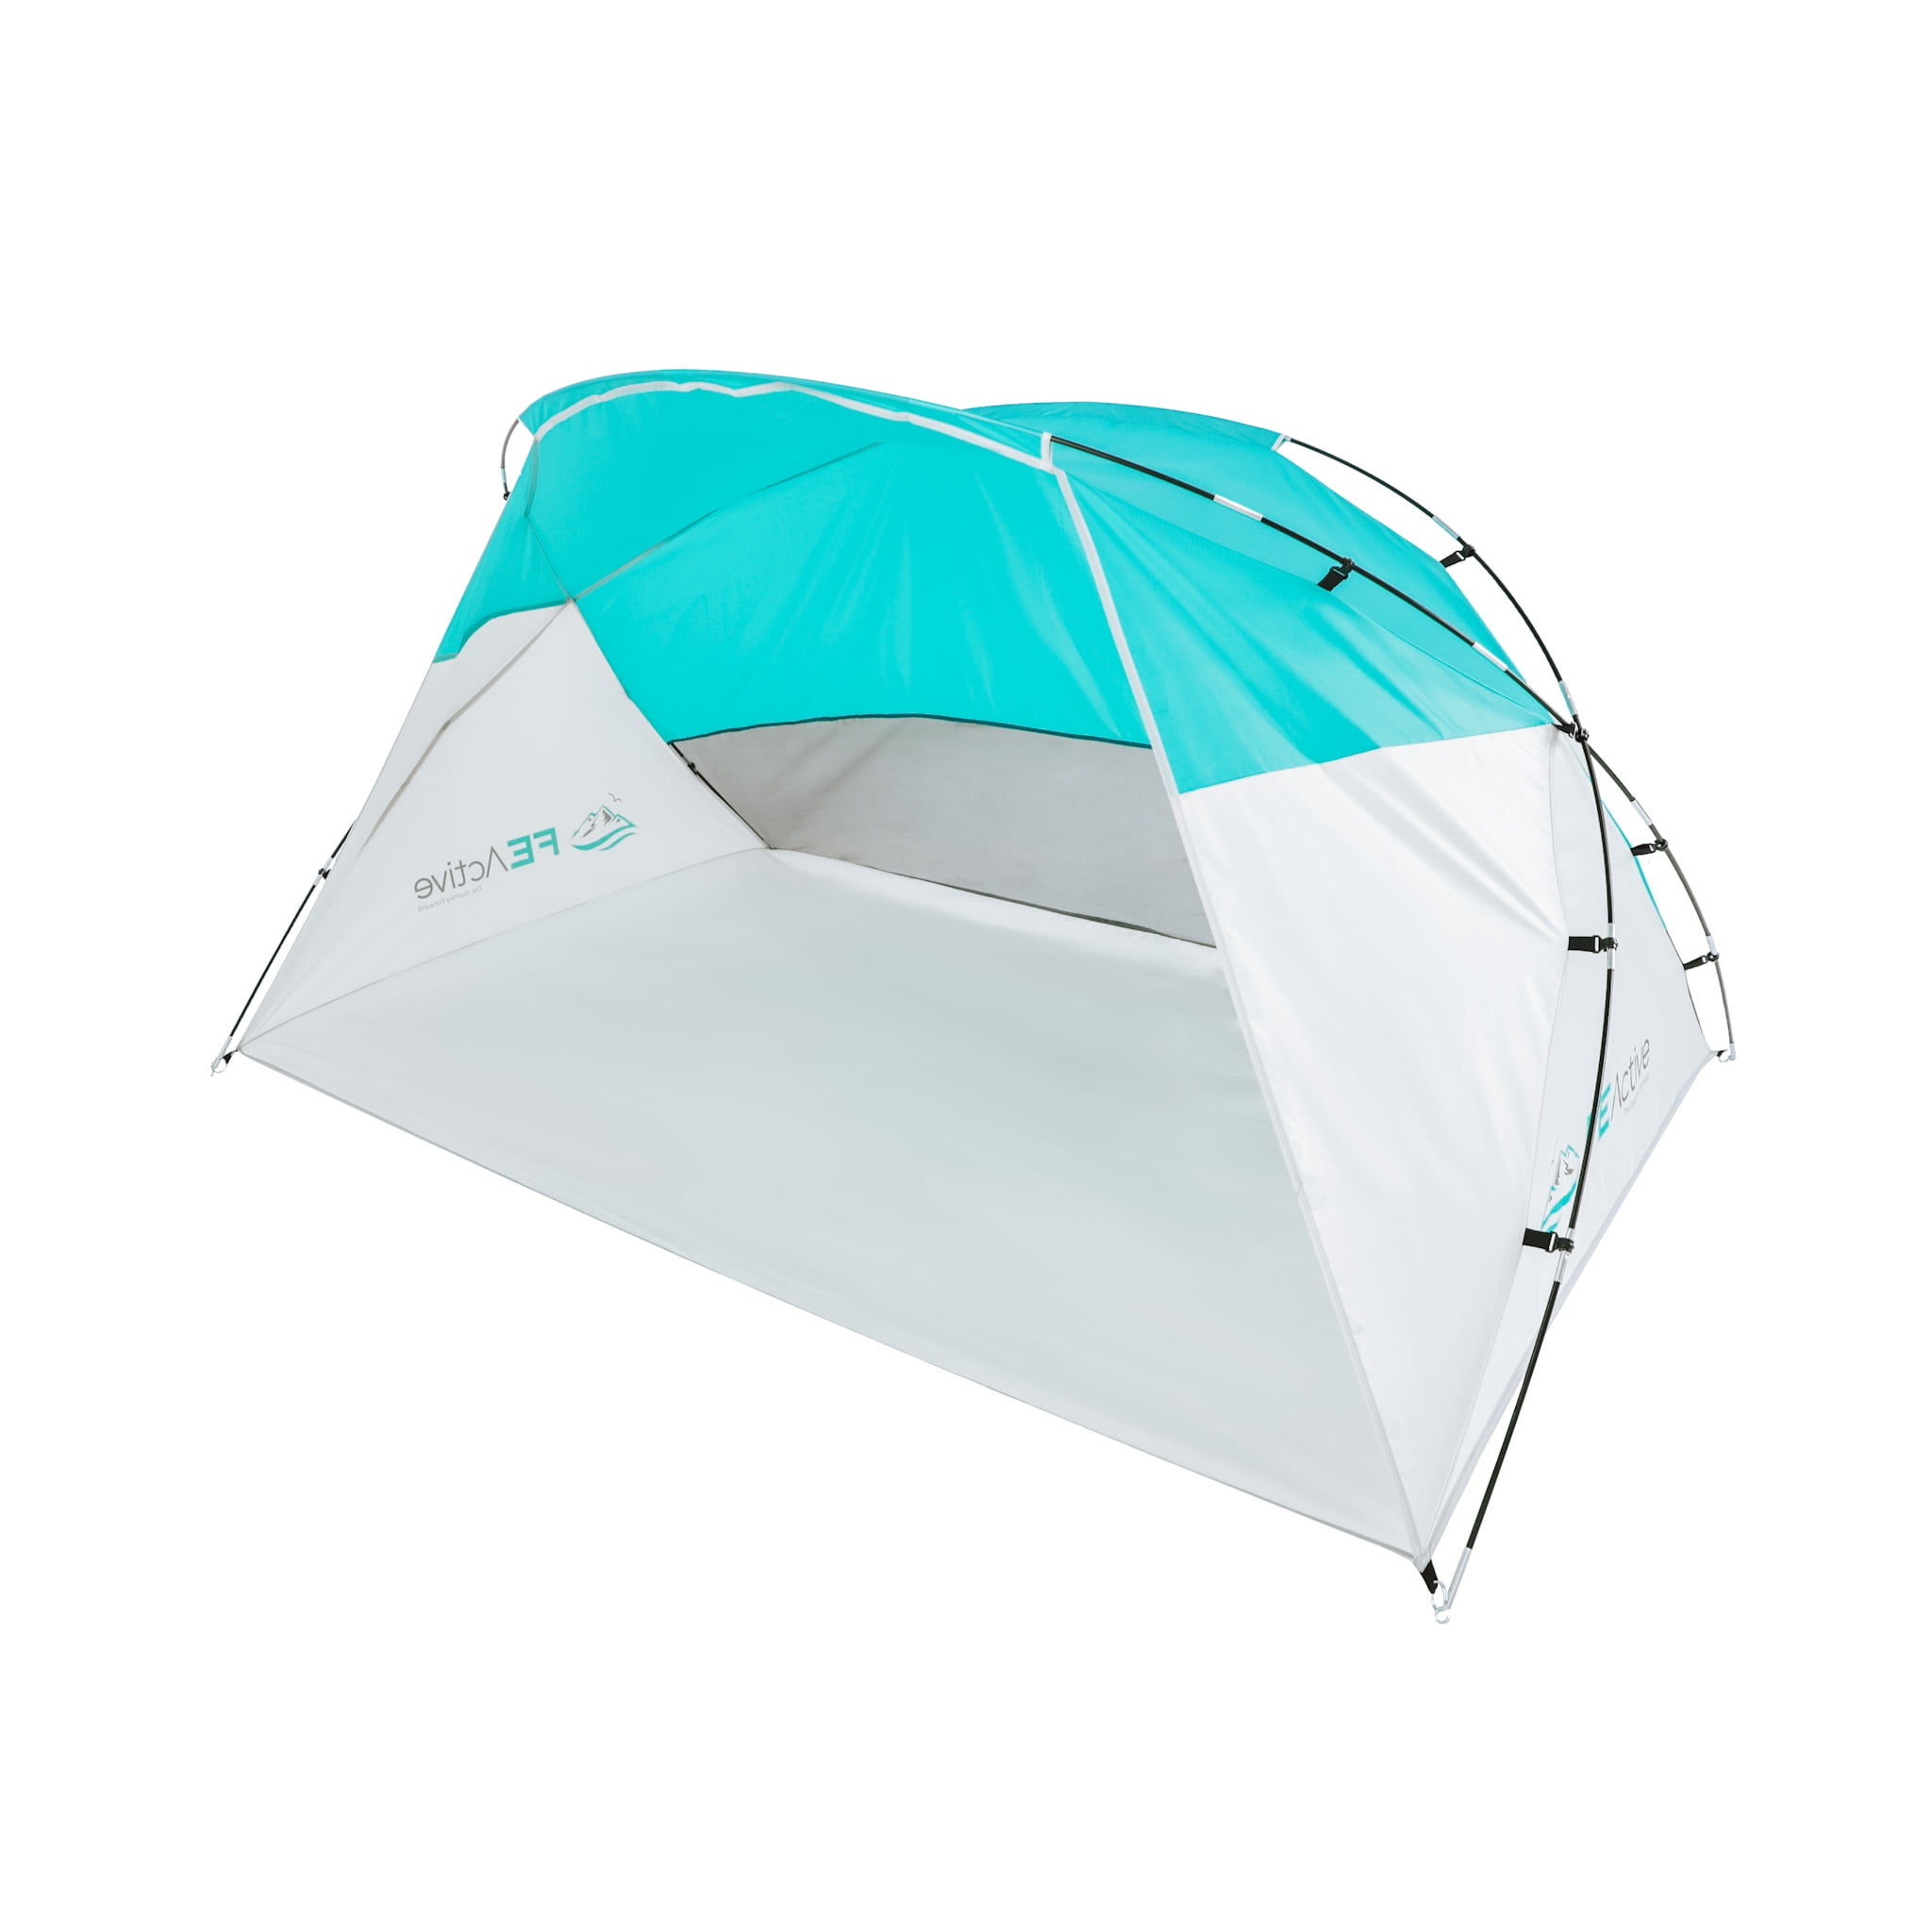 MOISO Pop Up Beach Tent Sun Shelter Anti UV Beach Shelter for Outdoor Sets Up in Seconds 3-4 Person Portable Tent